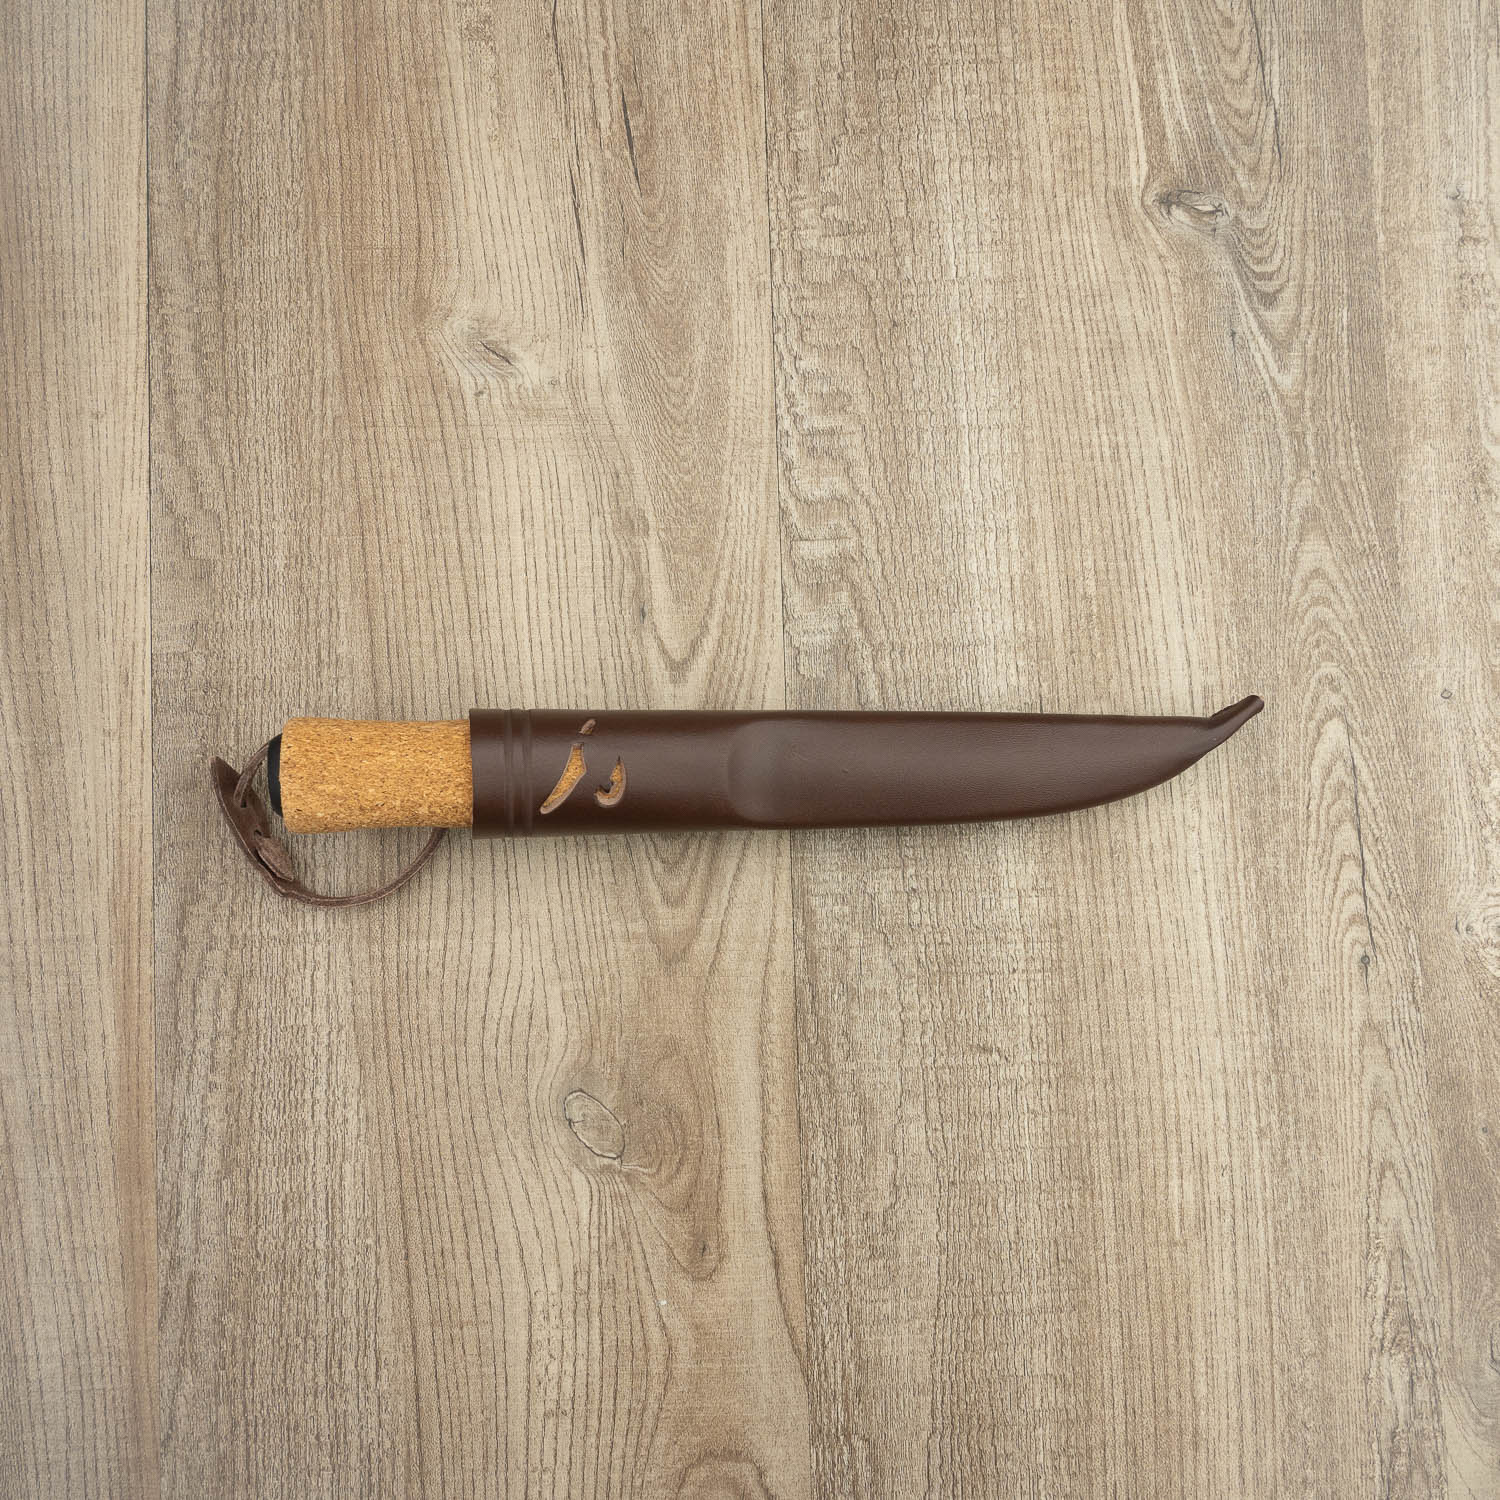 Helle Knives Hellefisk 123mm Fishing and Hunting Knife